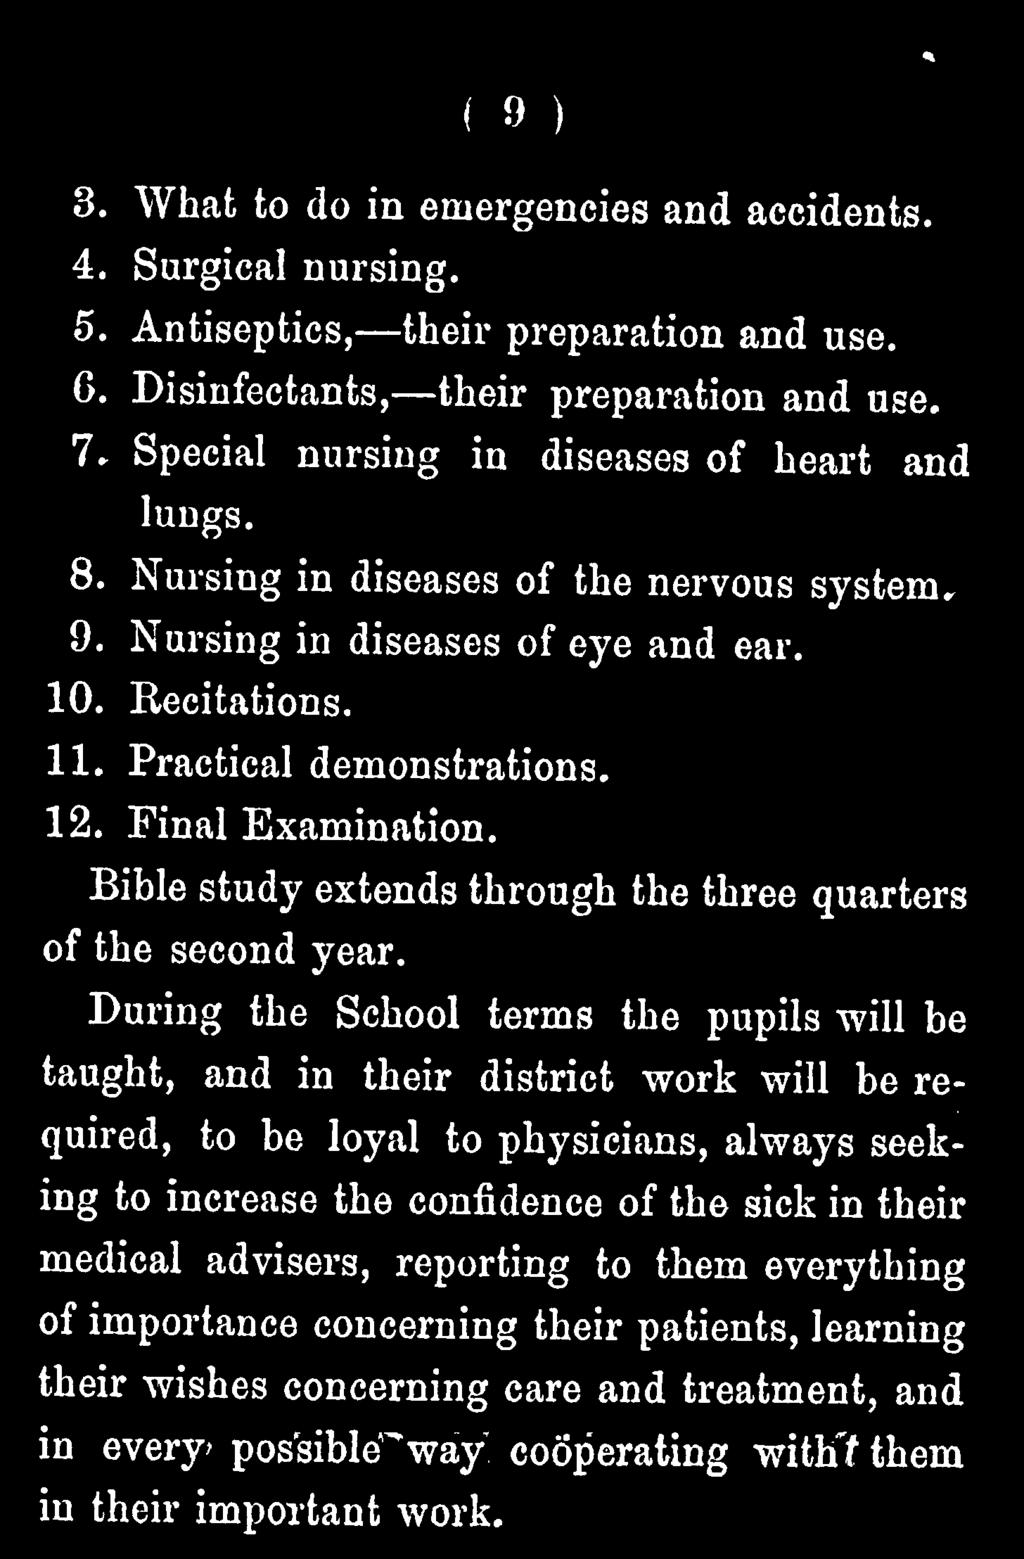 During the School terms the pupils will be taught, and in their district work will be required, to be loyal to physicians, always seeking